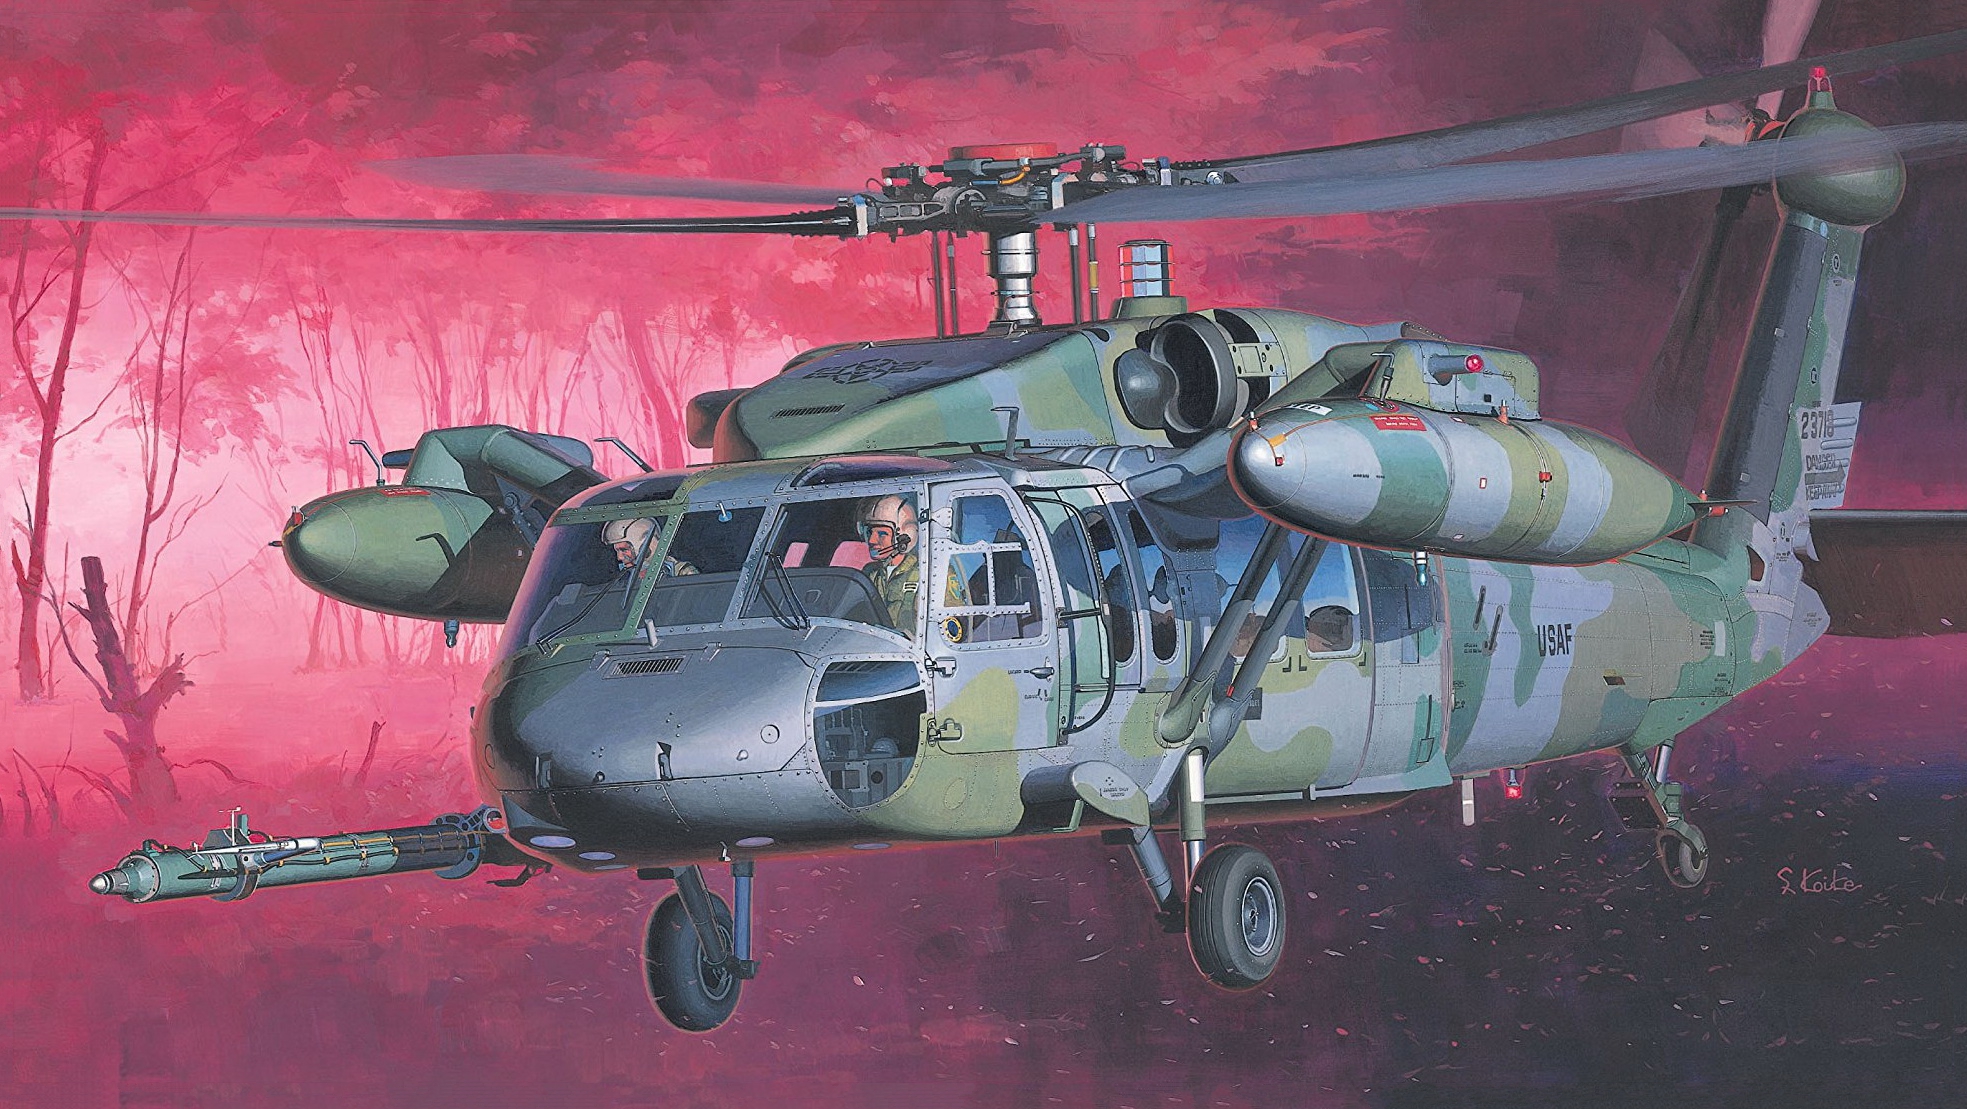 General 1967x1109 aircraft military army military vehicle artwork pilot flying frontal view signature military aircraft helmet Sikorsky HH-60 Pave Hawk US Air Force helicopters Shigeo Koike Boxart American aircraft Sikorsky Aircraft propaganda